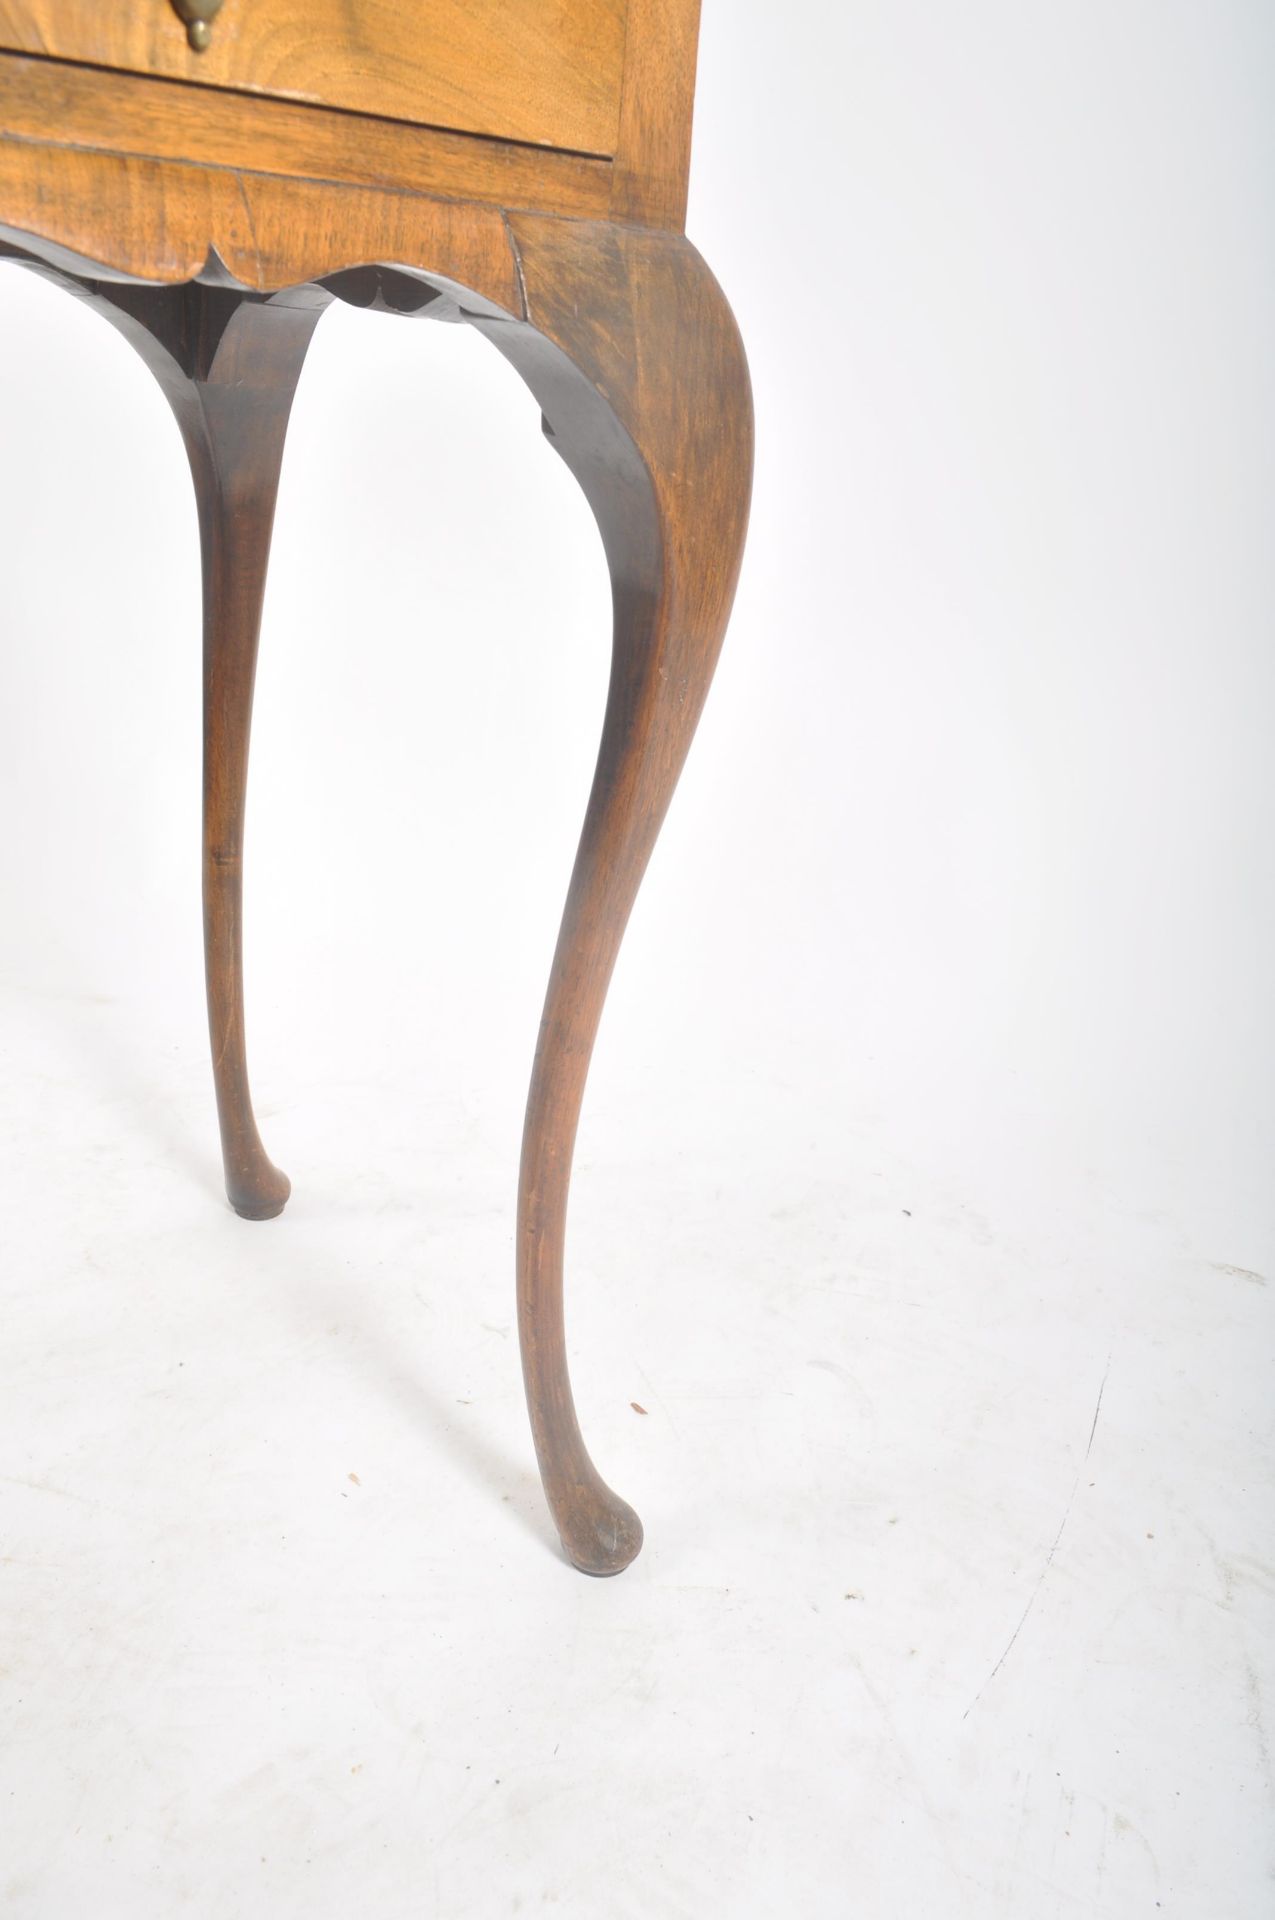 QUEEN ANNE REVIVAL CIRCA 1900 WALNUT BEDSIDE CABINET TABLE - Image 6 of 8